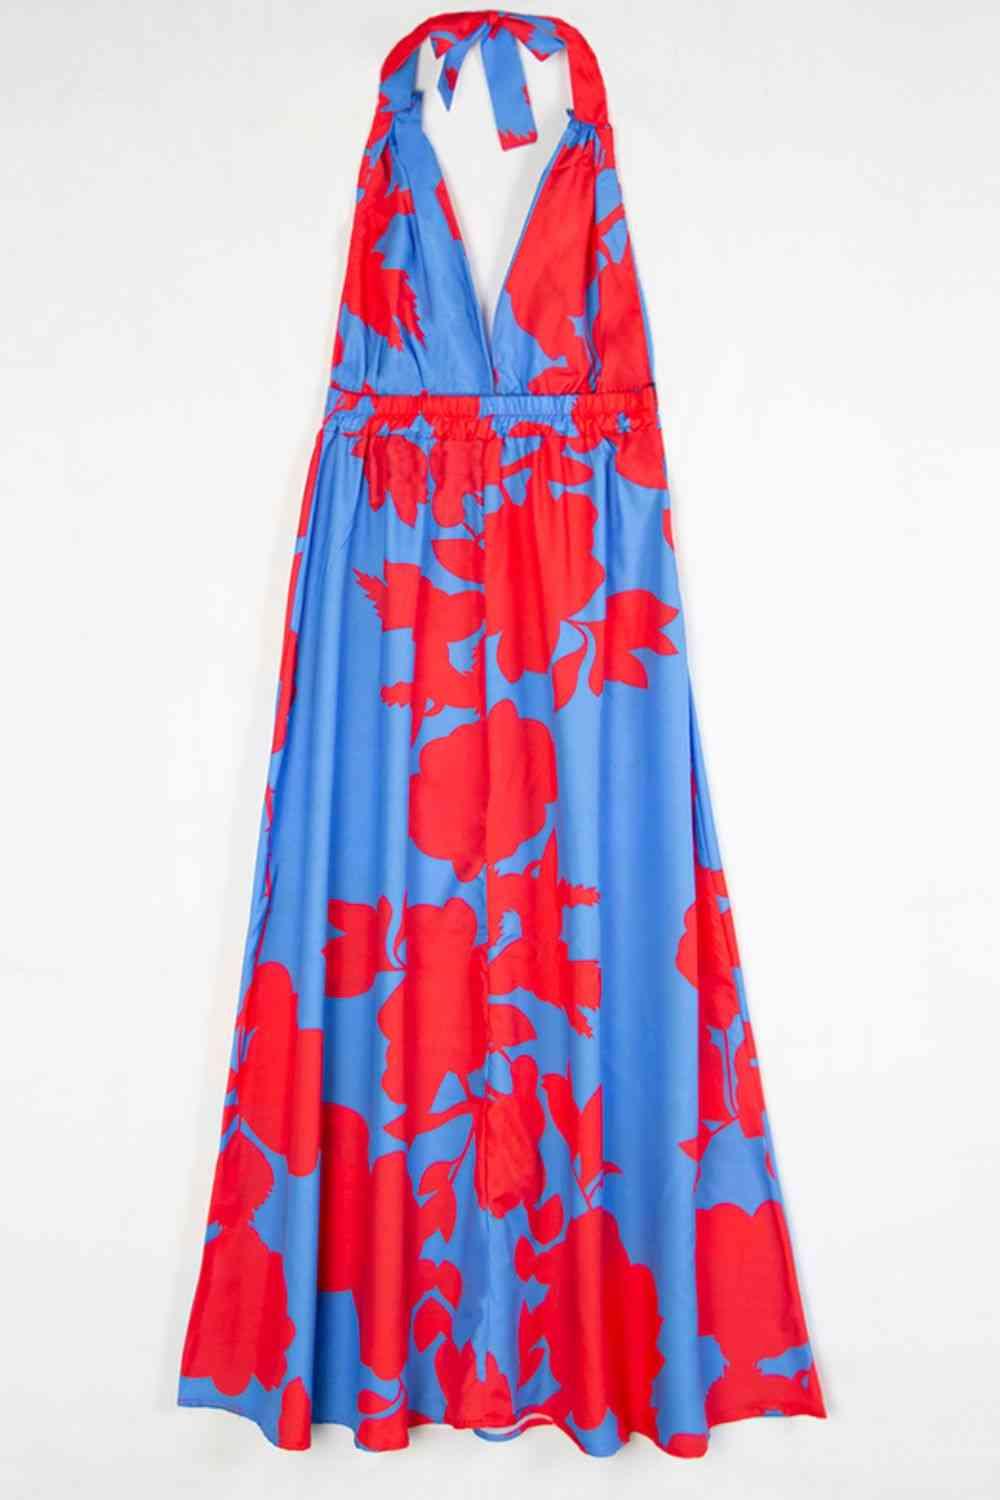 a red and blue dress hanging on a wall